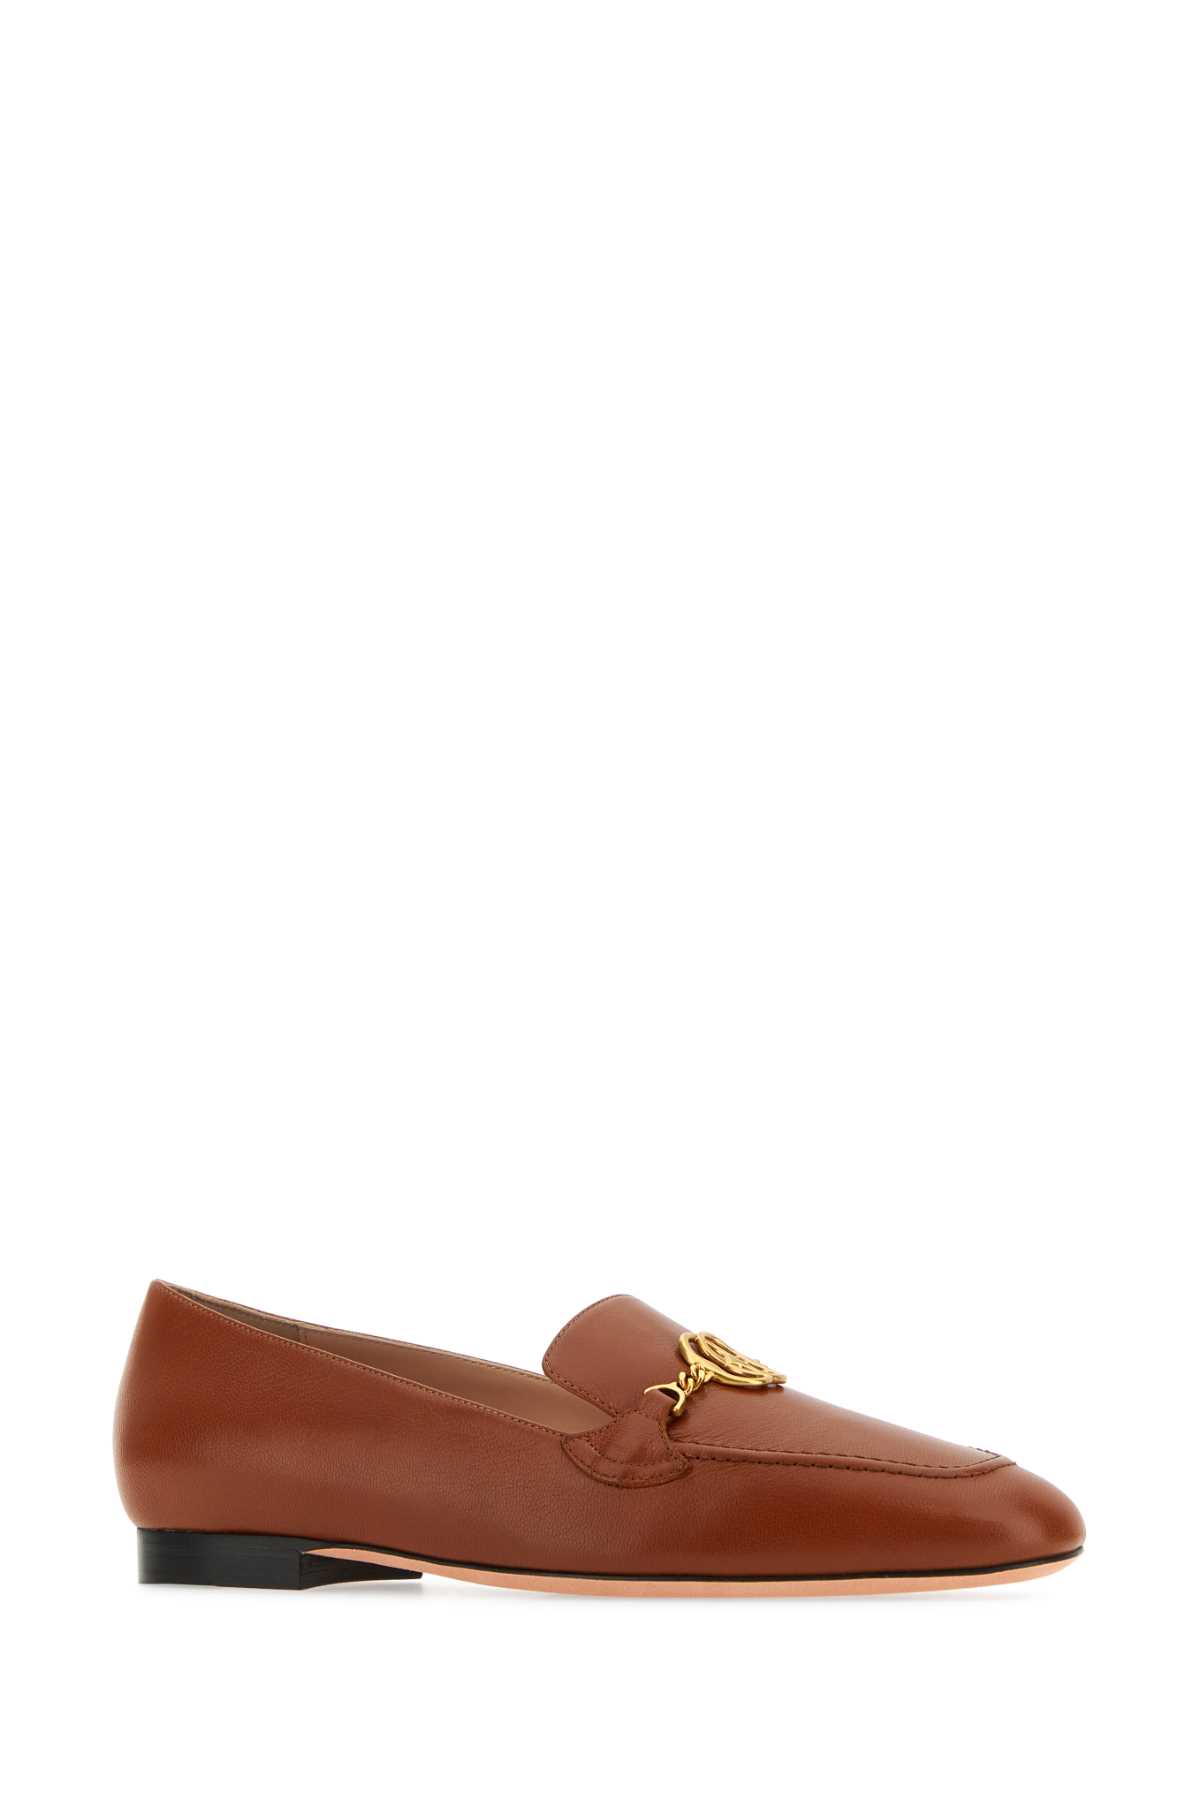 Bally Caramel Leather Obrien Loafers In Cuero50